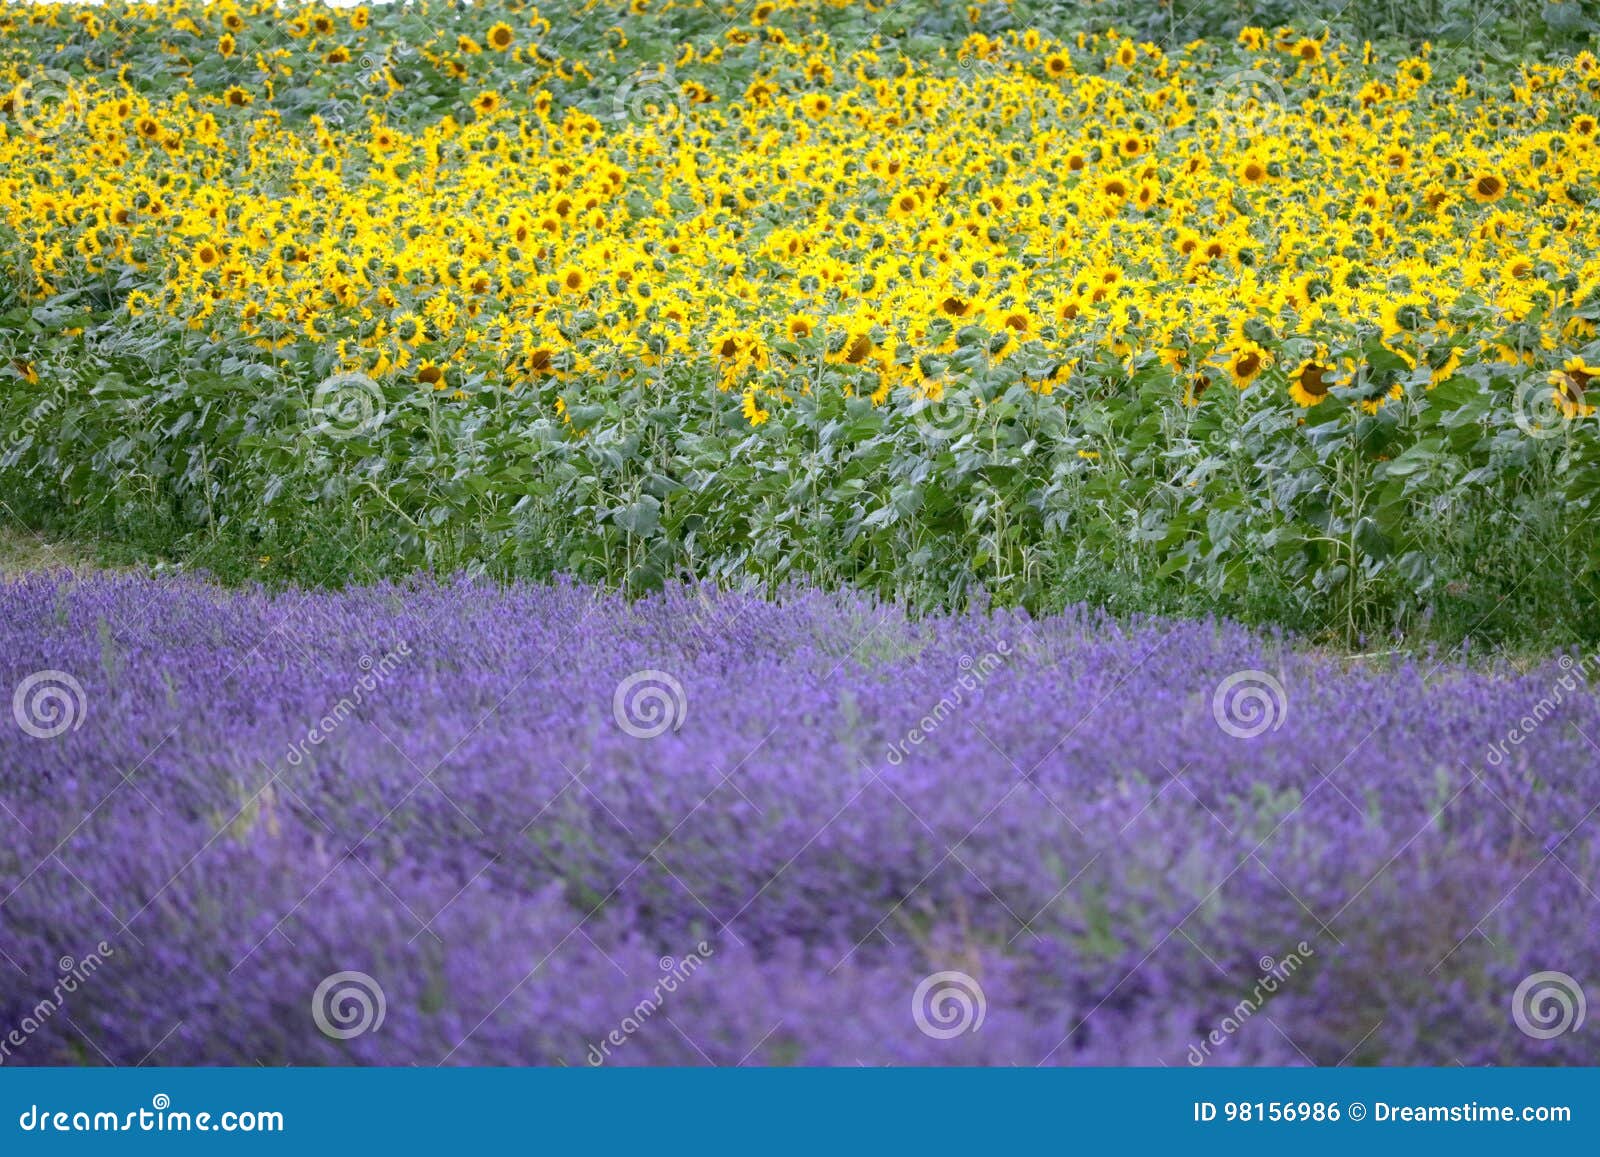 hitchin lavender and sunflower field, england